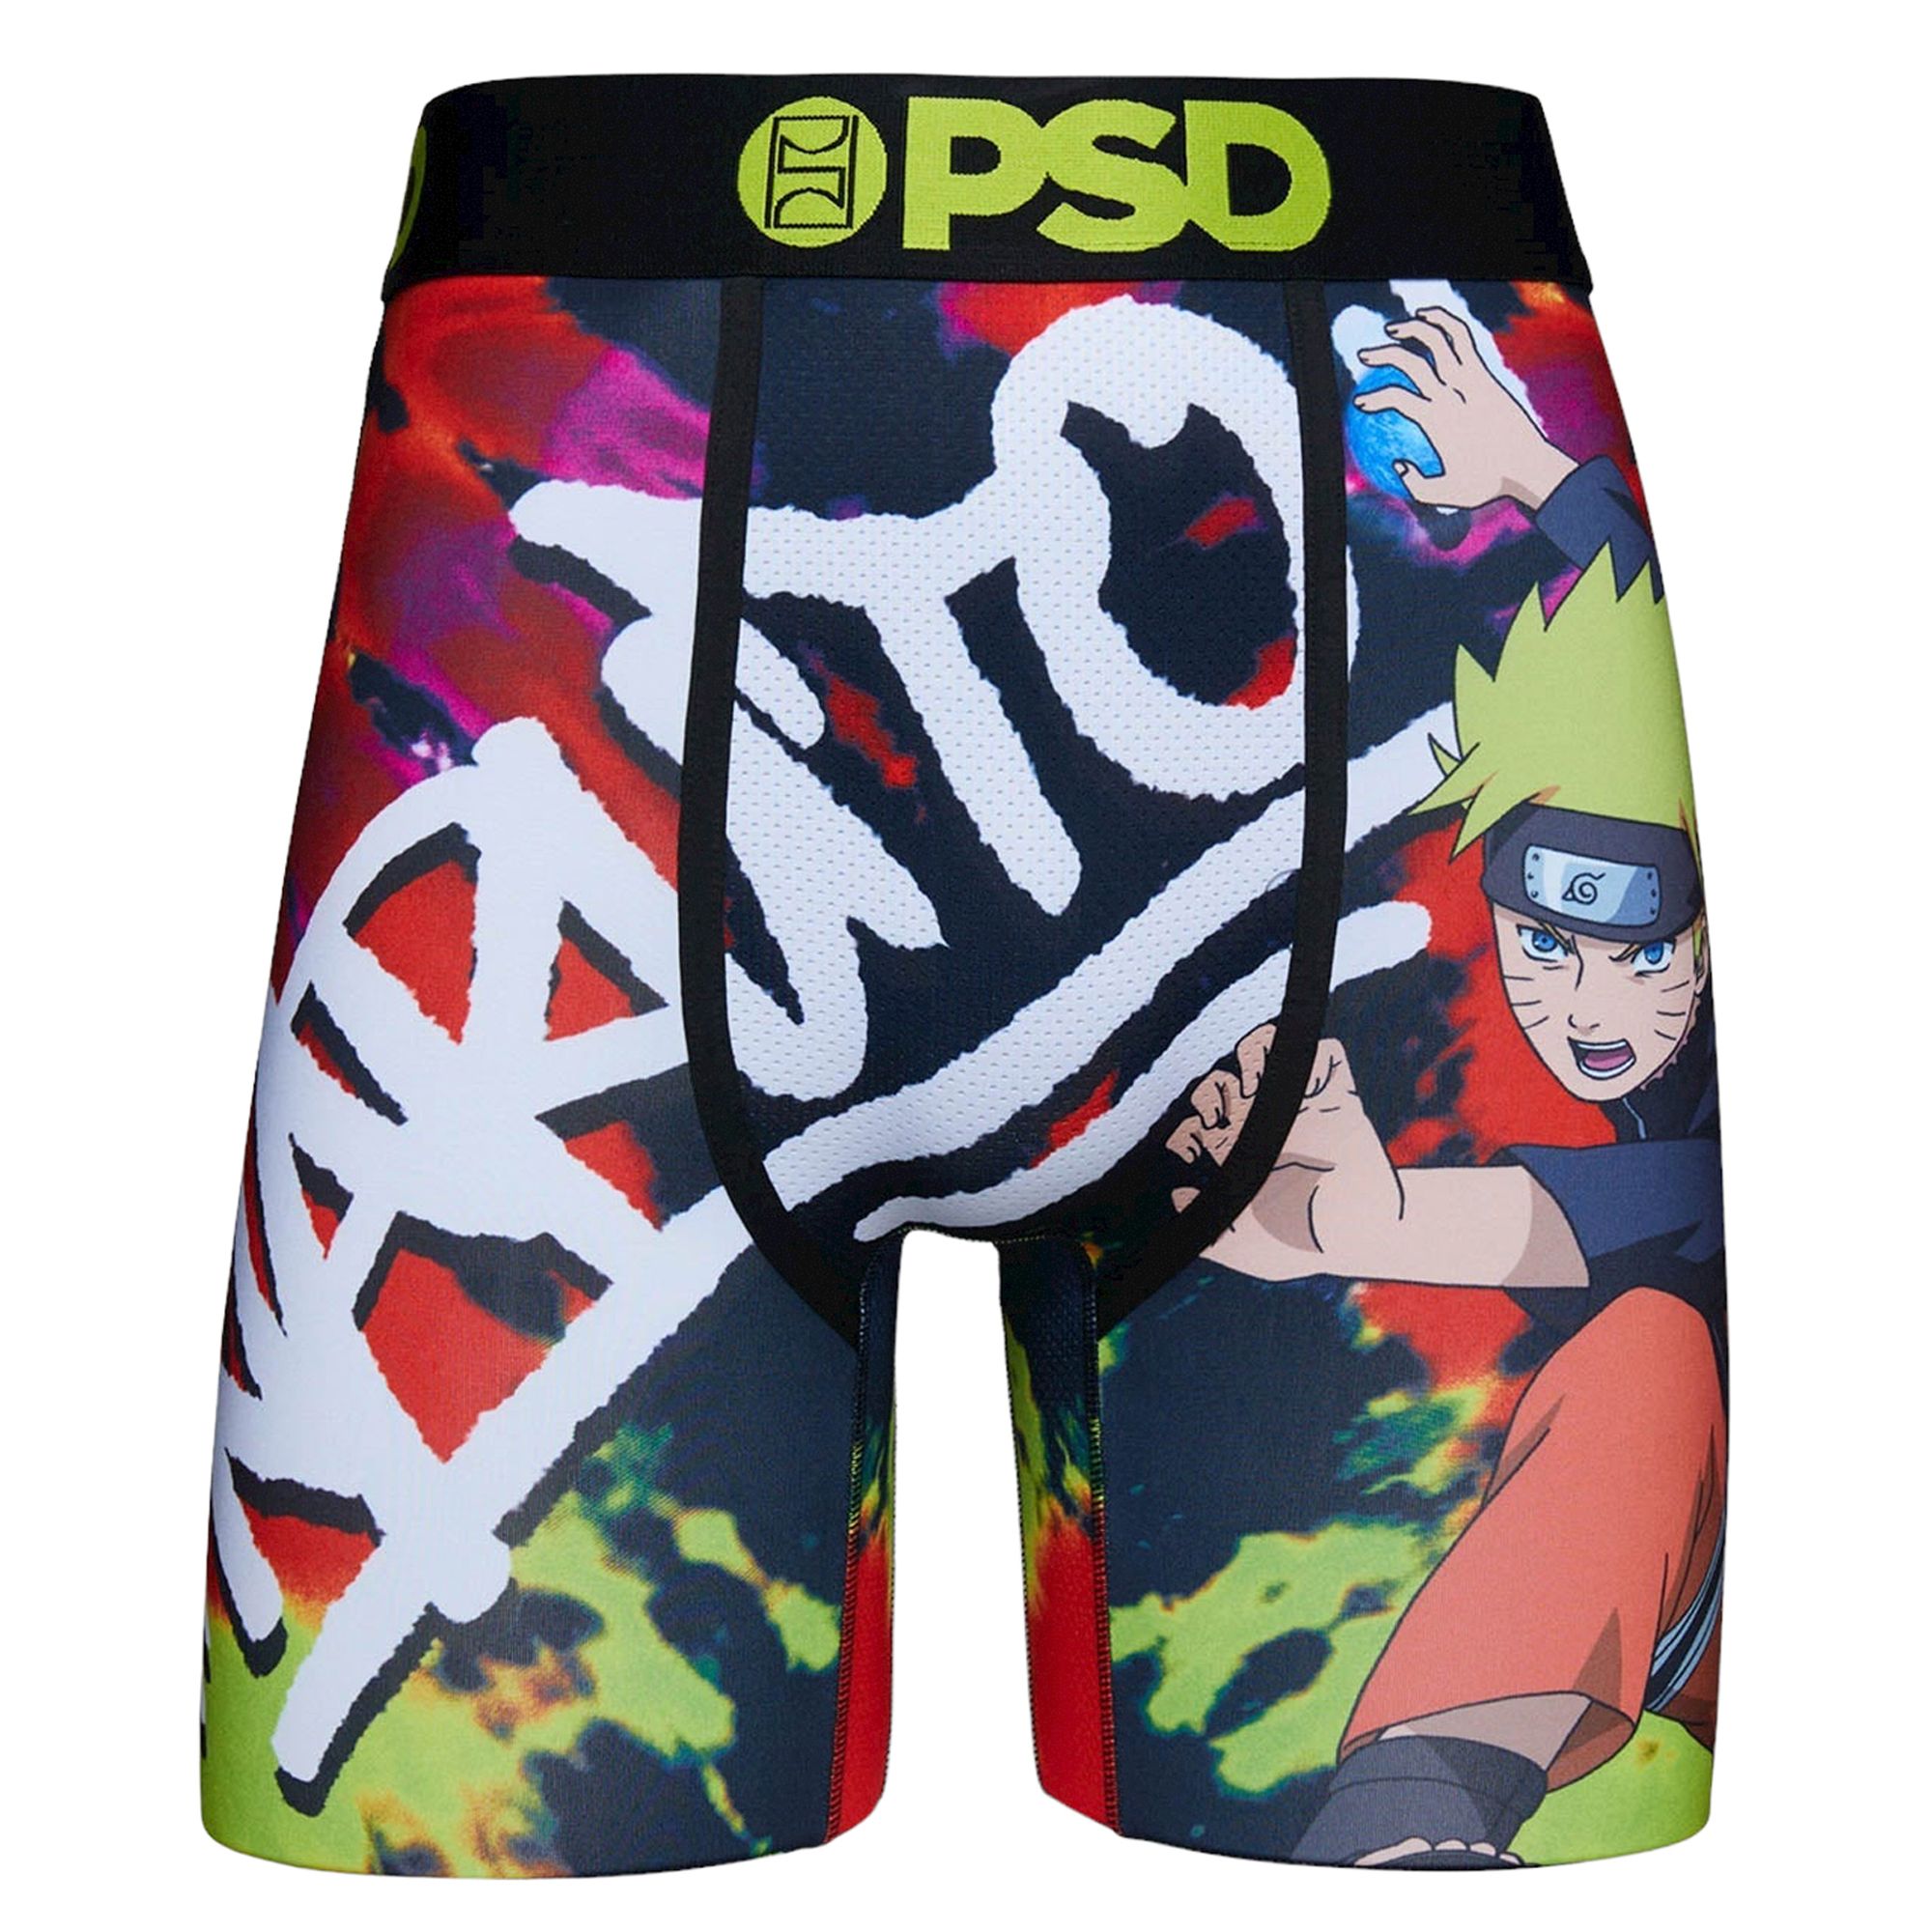 PSD Underwear Women's Athletic Fit Naruto Boy Short with Wide Elastic Band